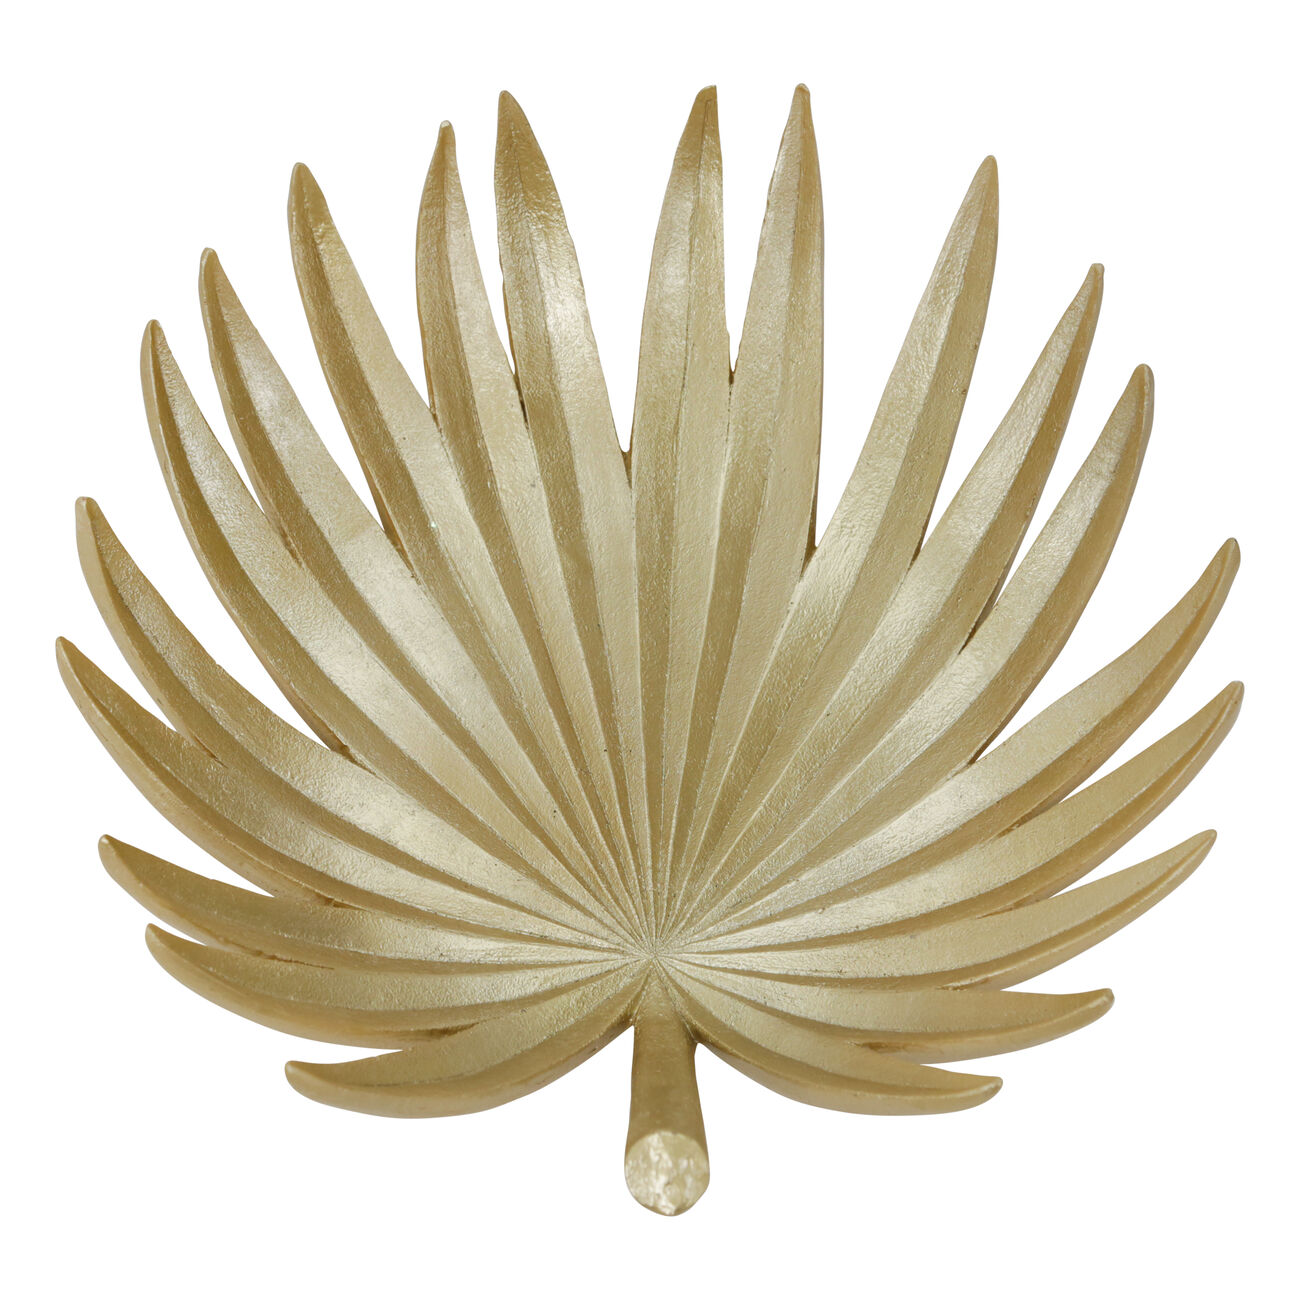 Polyresin Decorative Plate with Palm Leaf Design, Gold